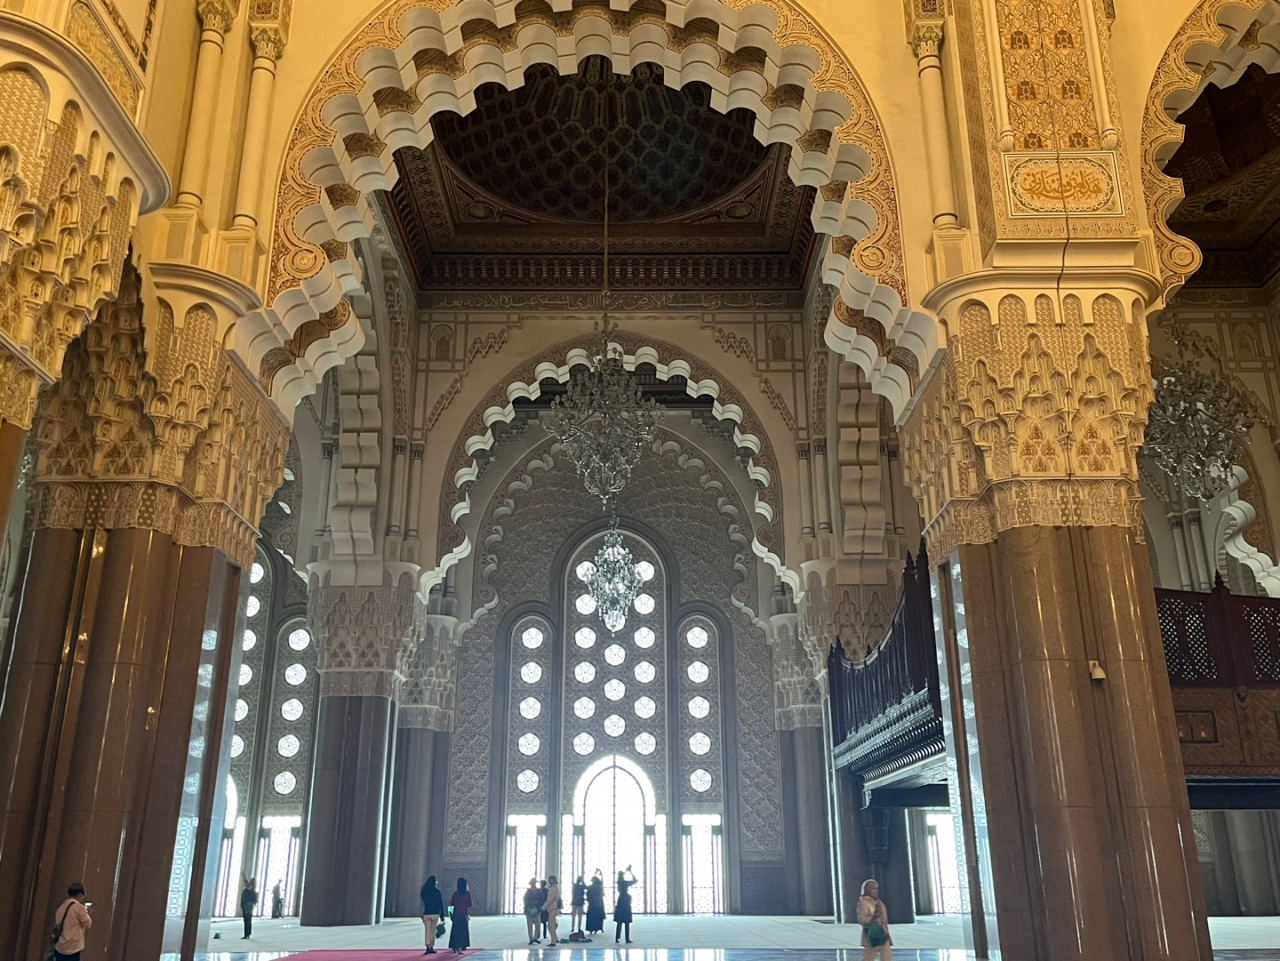 Visitors tour the Hassan II Mosque in Casablanca, the largest functioning mosque in Africa. (Lee Jaeeun/The Korea Herald) (Lee Jaeeun/The Korea Herald)